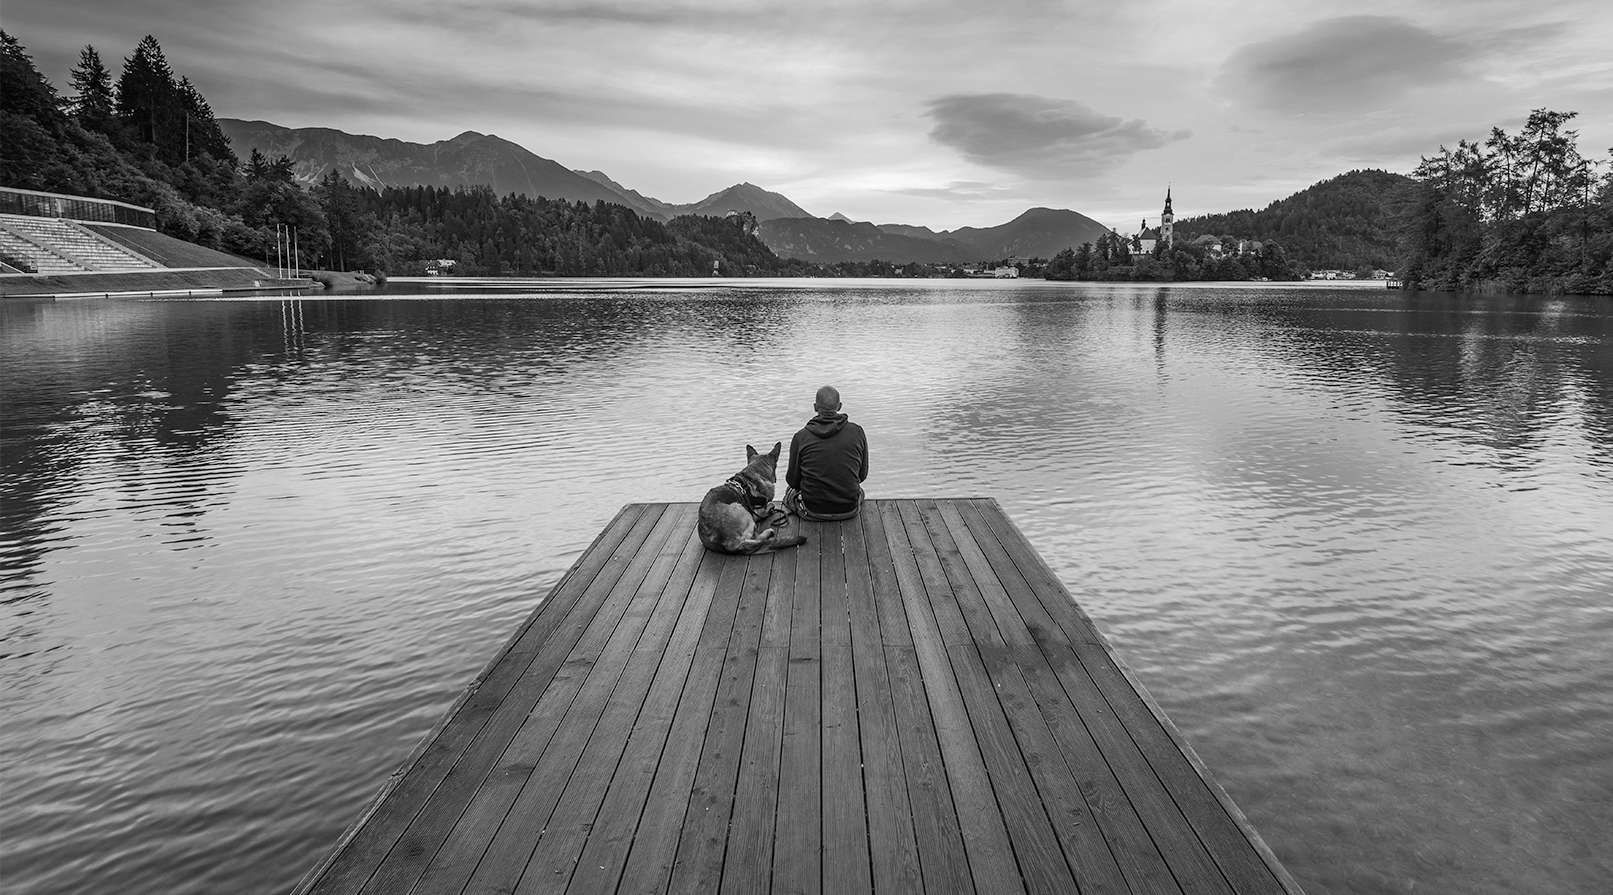 Man and His Dog on a Dock